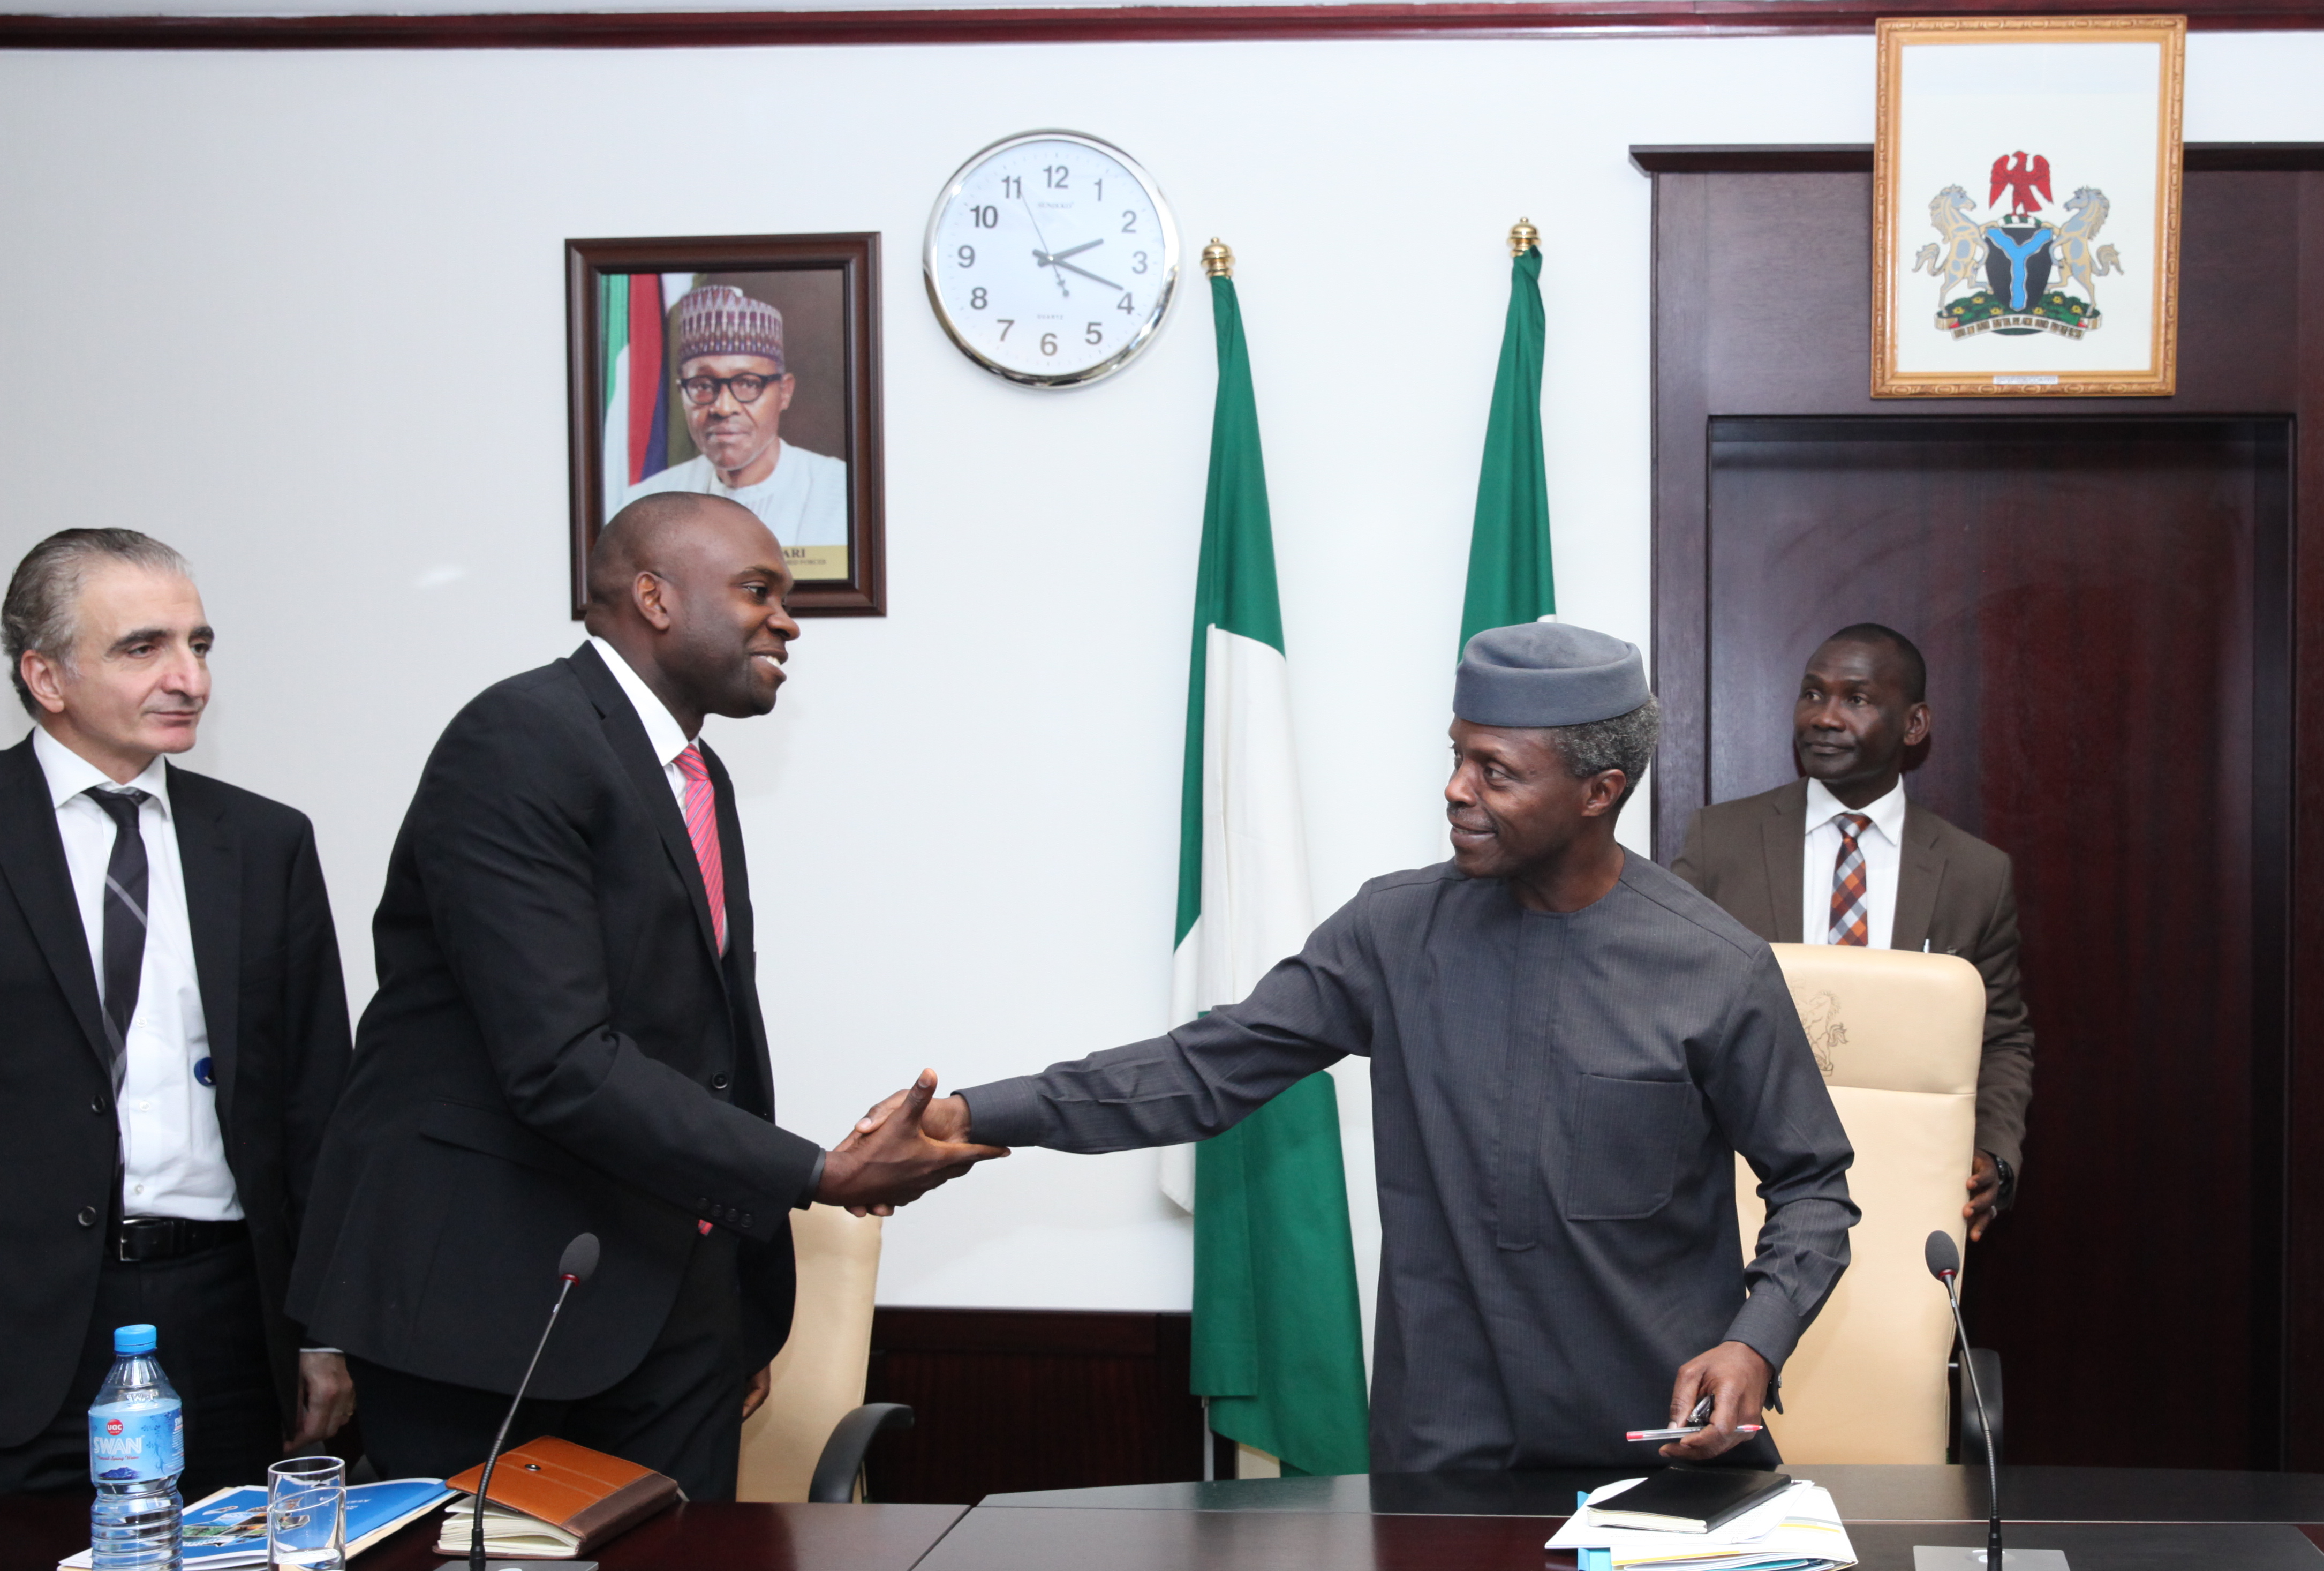 VP Osinbajo Meets Corporate Council On Africa For Upcoming 10th US-Africa Biennial Summit On 18/01/2016